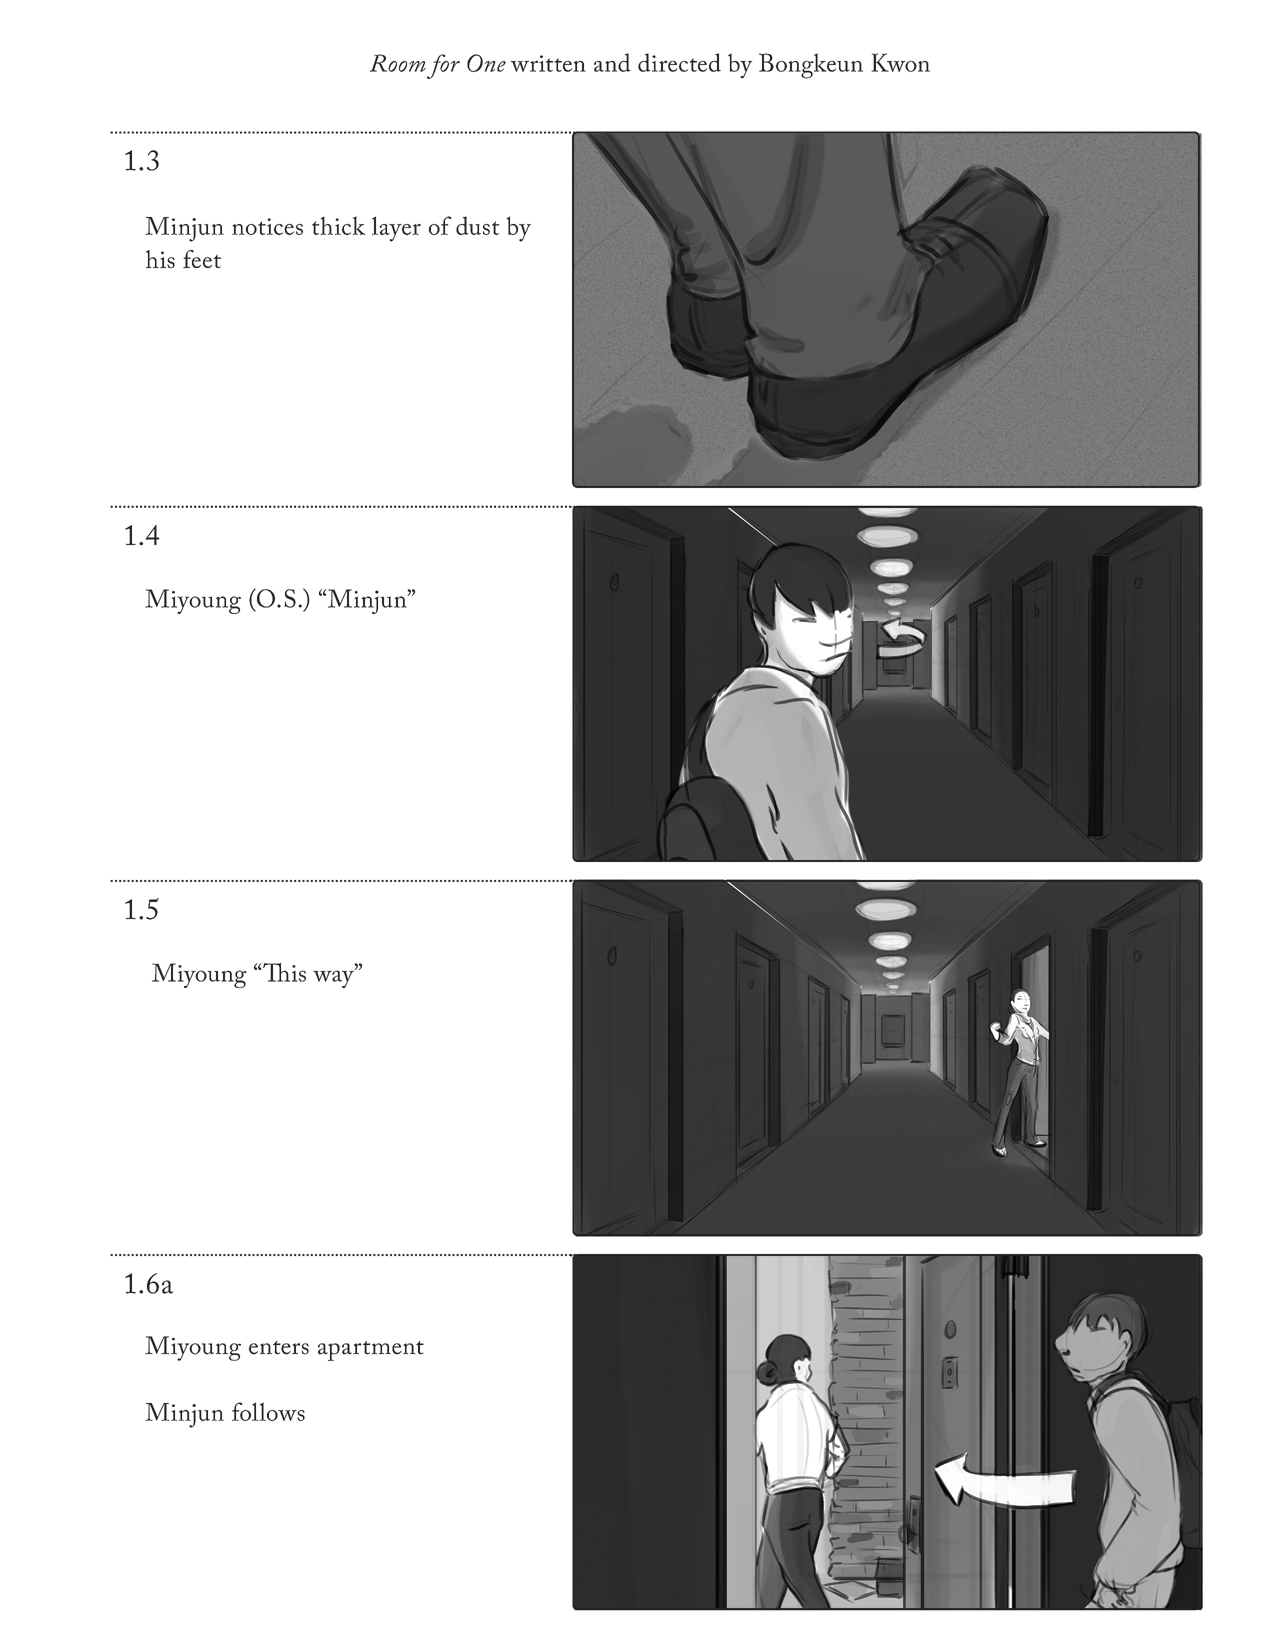 All-live-action-storyboards-with-new-vertical-format-2